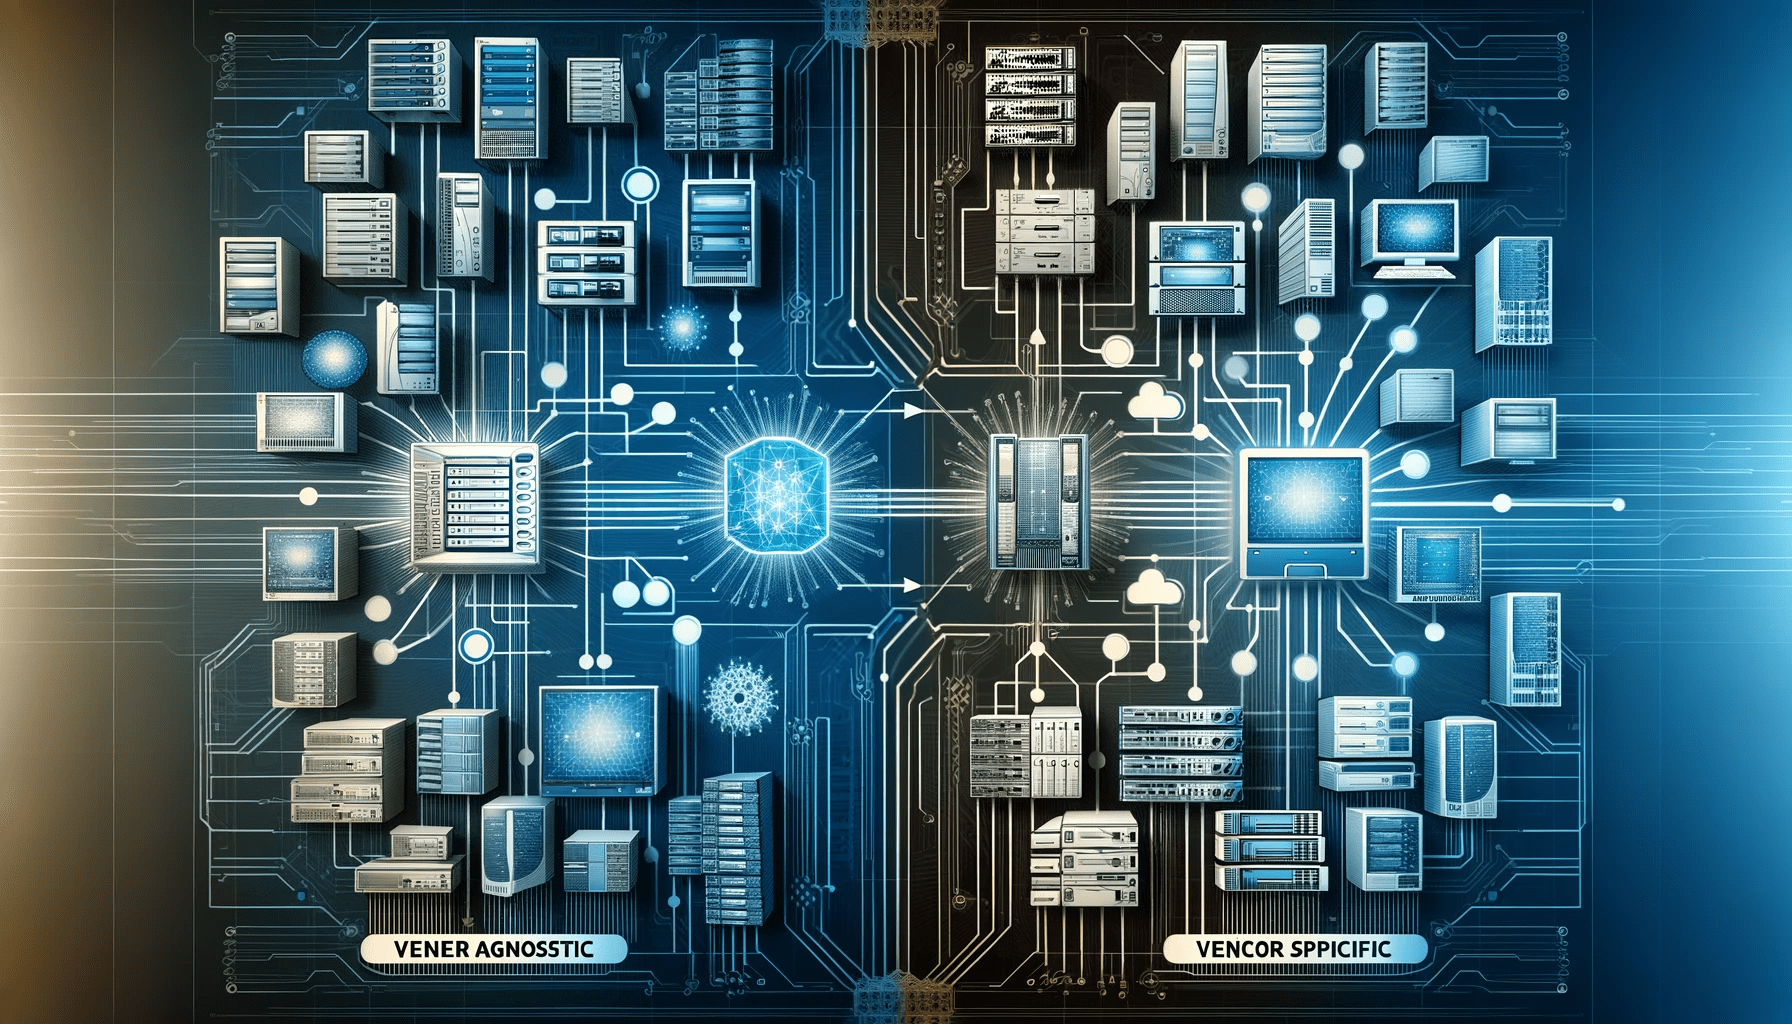 Abstract illustration showing the contrast in network management between diverse, interconnected devices in vendor agnostic solutions and uniform devices in vendor specific solutions.